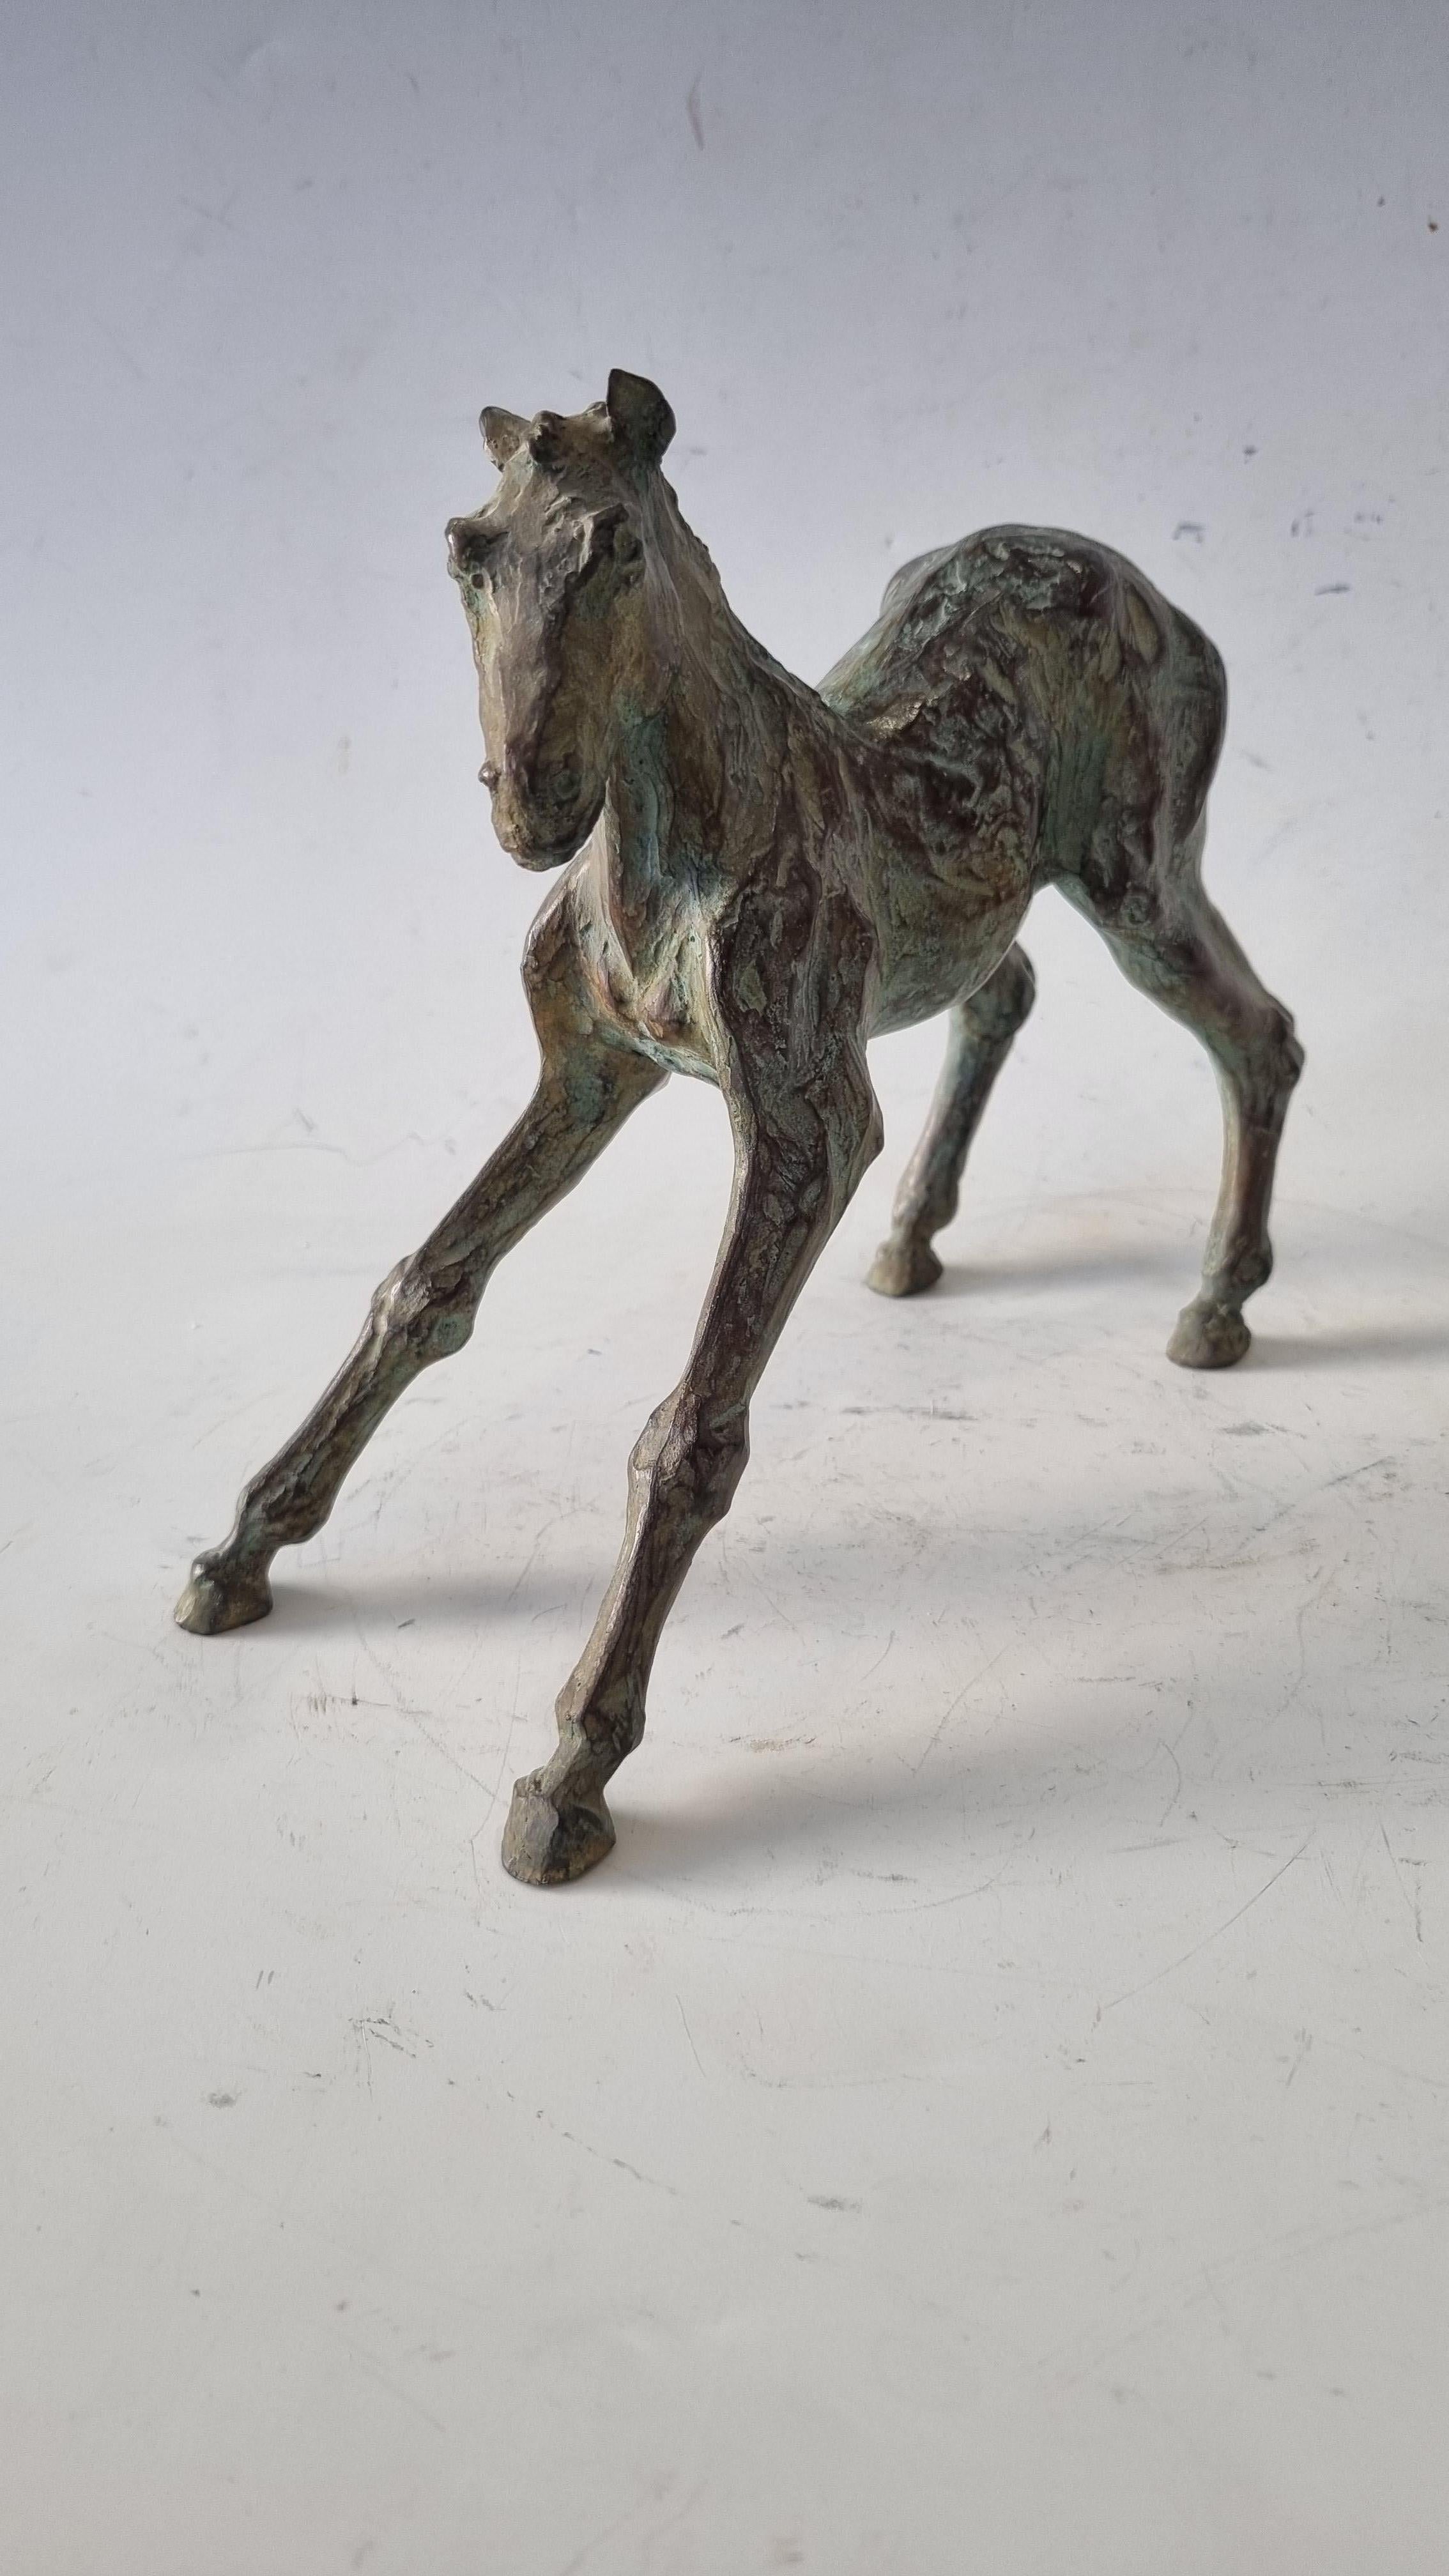 Animal sculptor Sophie MARTIN creates from inert clay a whole living animal kingdom.
She freely observes the animal and captures and interprets a movement; and places it in nature and real life with a zest of fancy. Without humanizing the model,